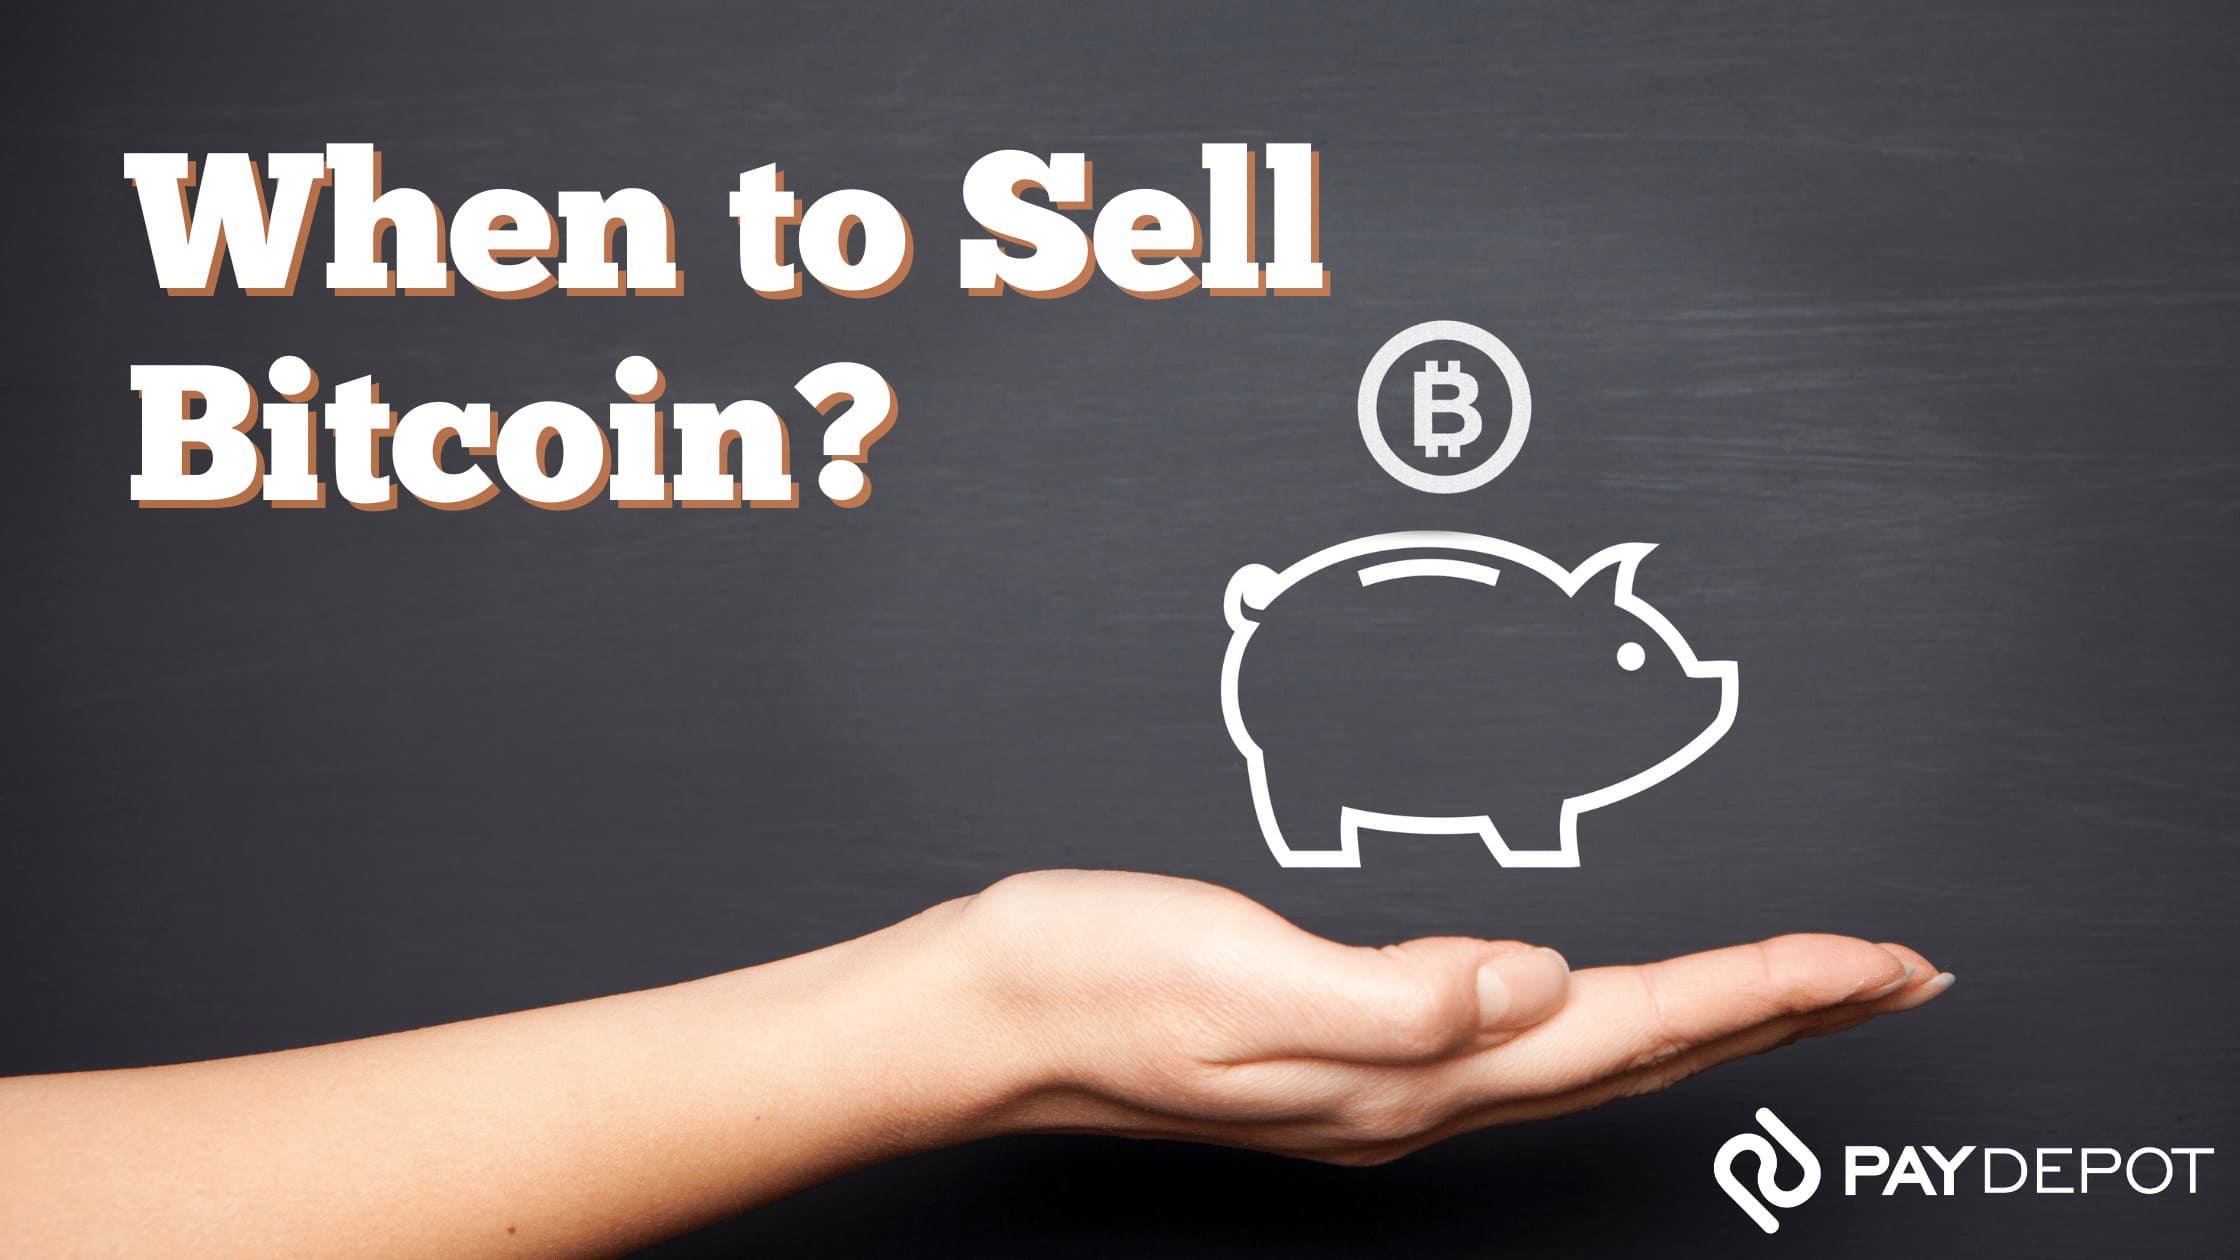 When to Sell Bitcoin